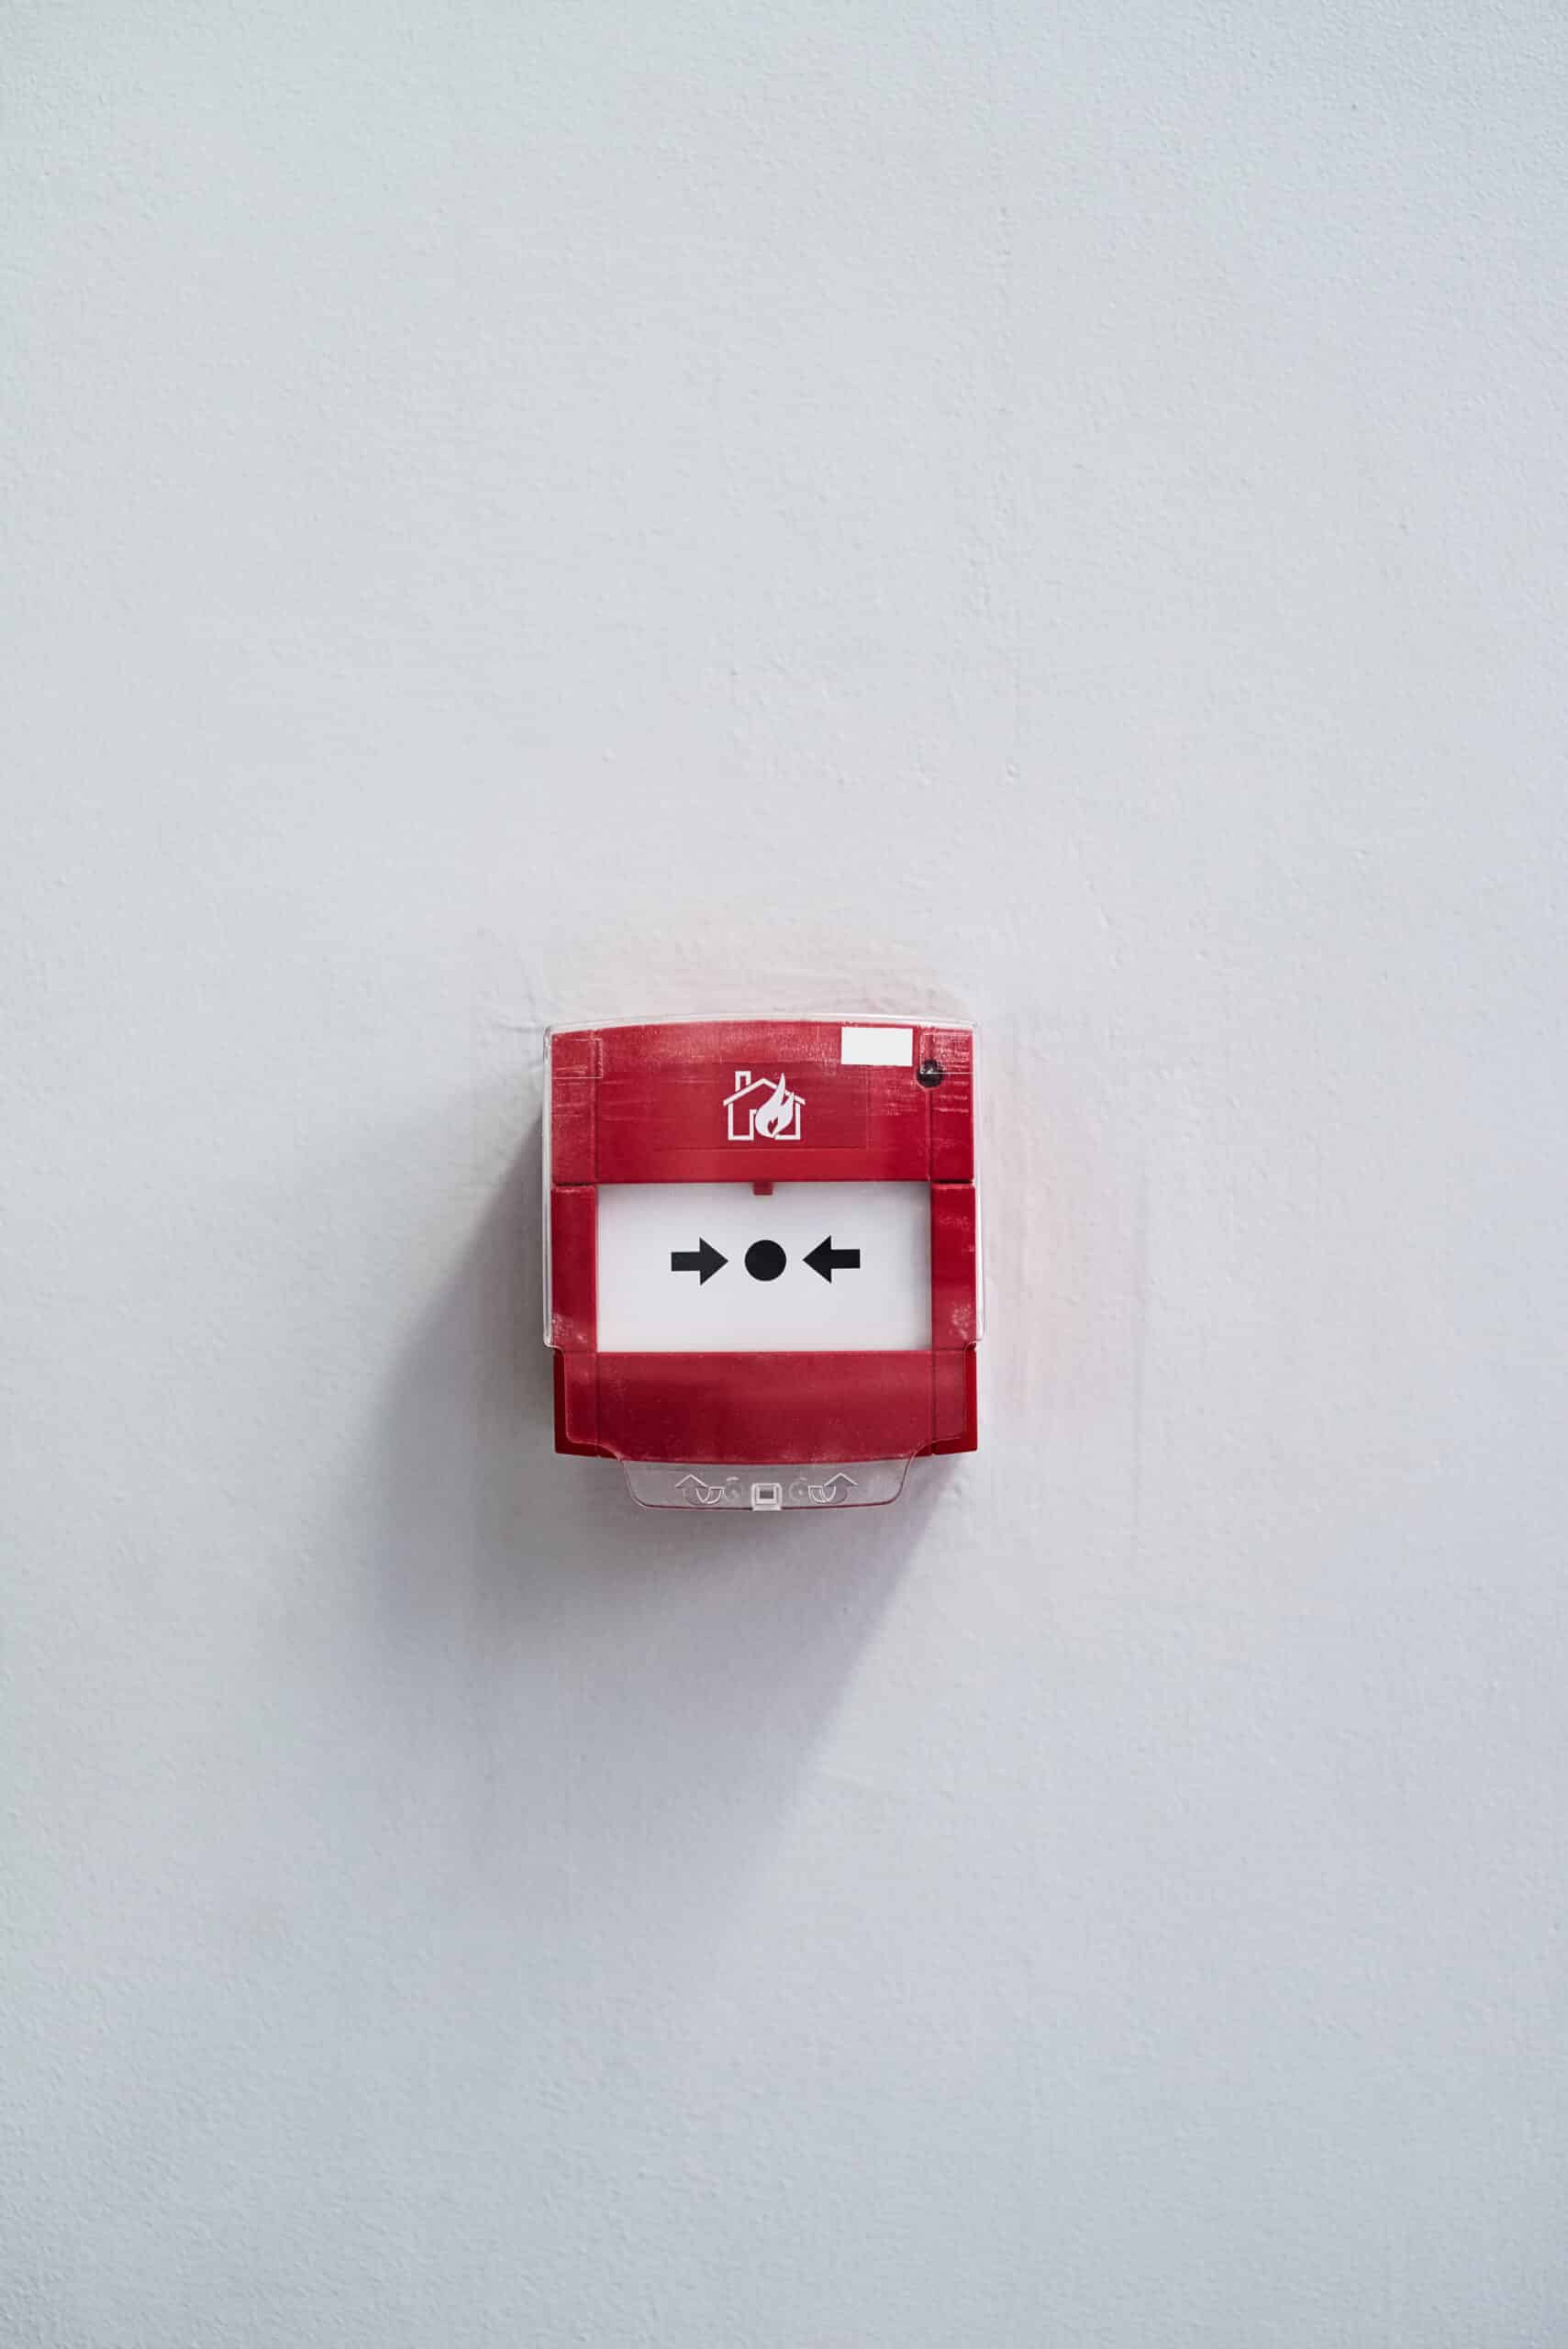 press in case of an emergency. shot of a fire alarm on a wall